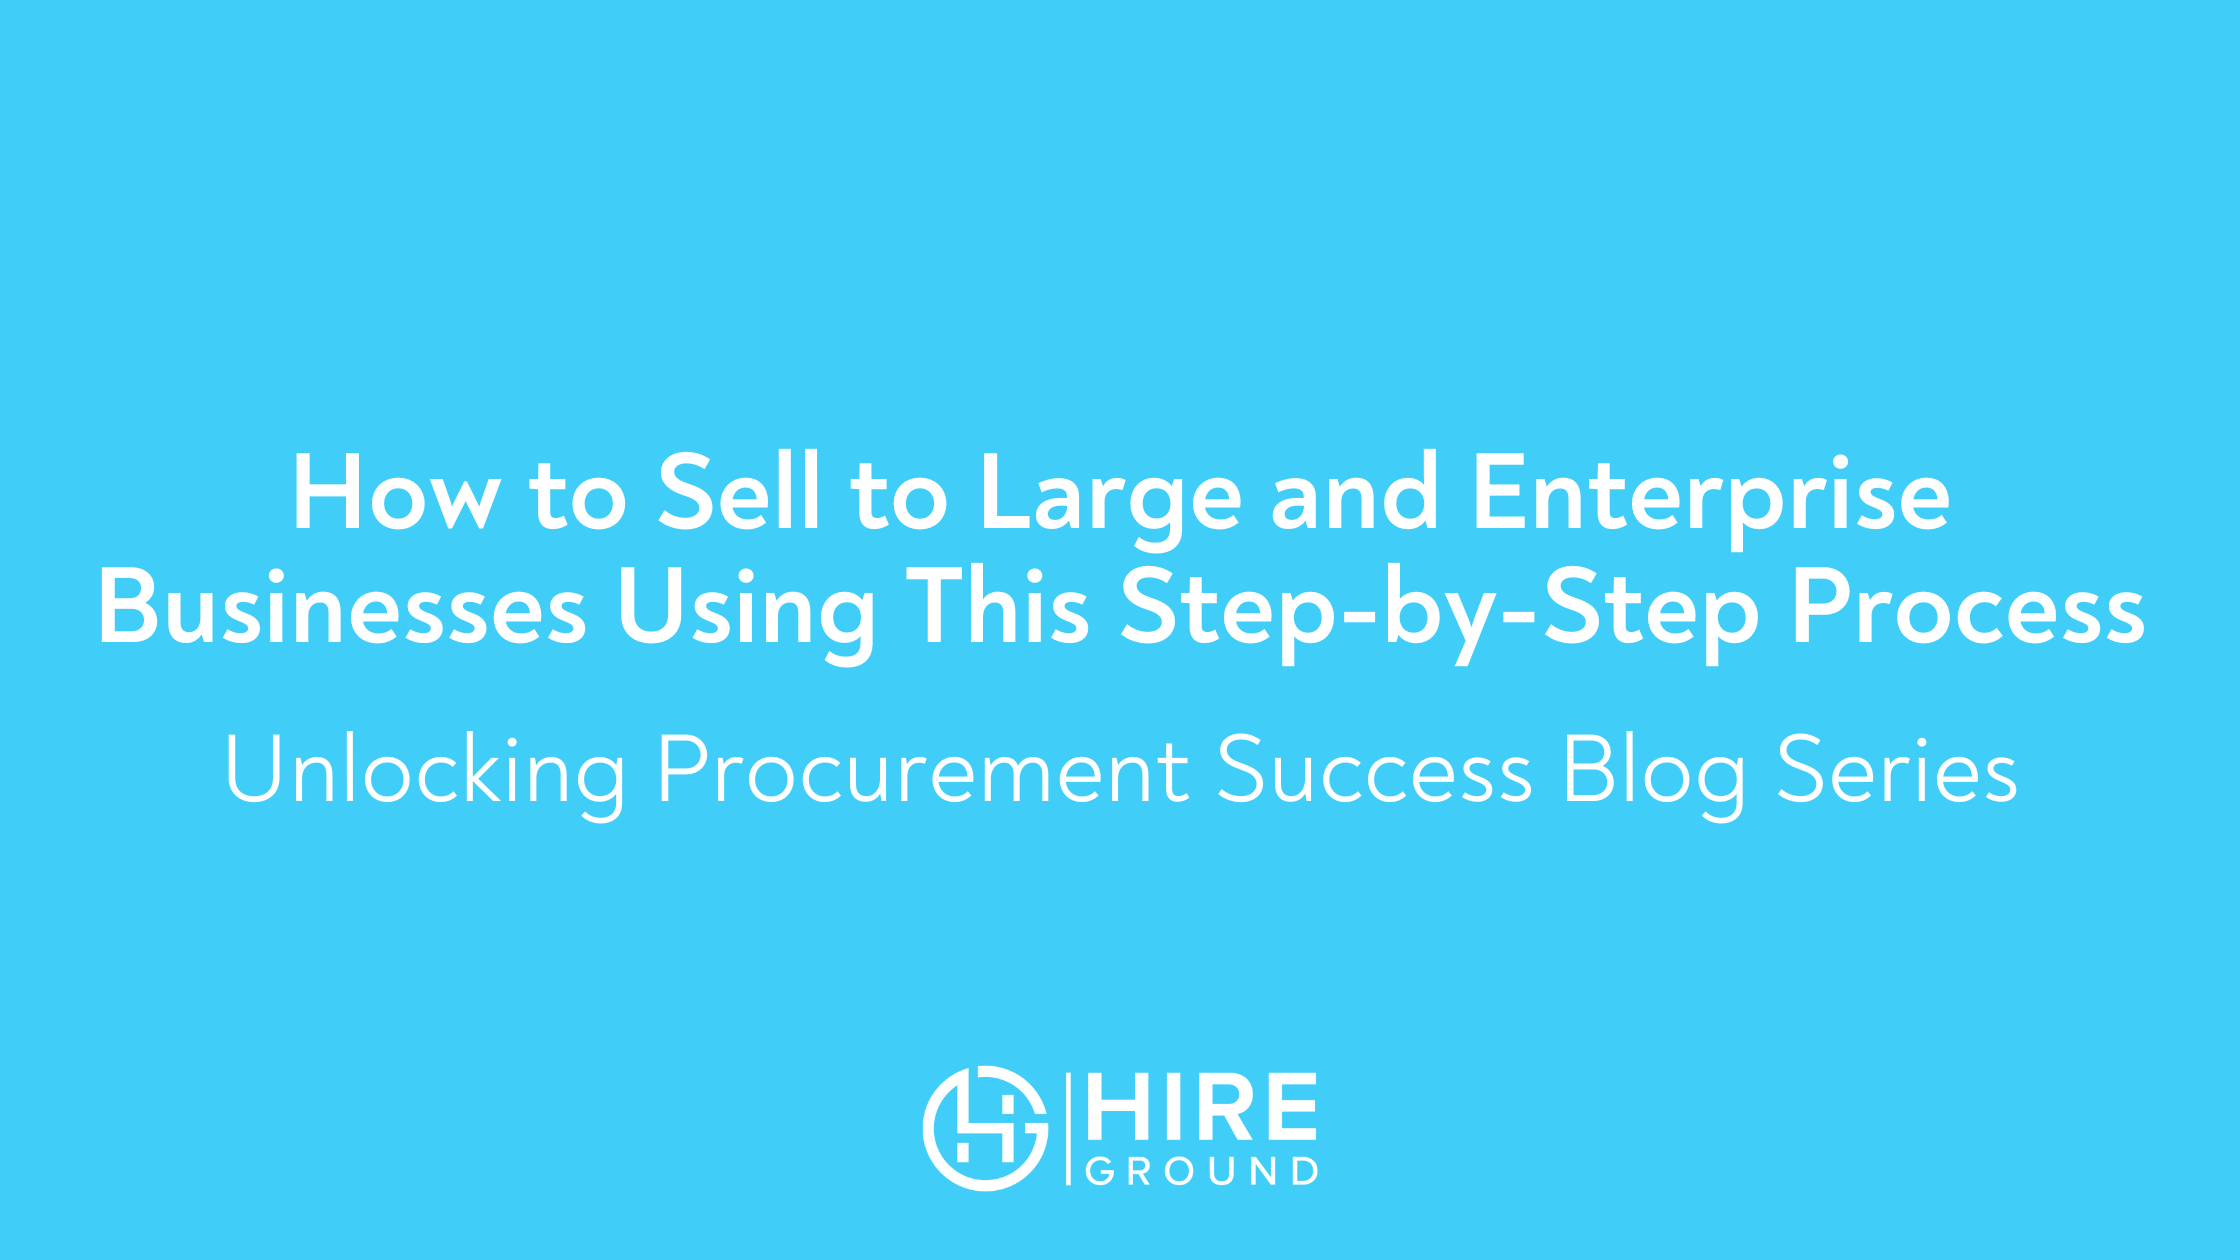 Cover graphic for the blog post: How to Sell to Large and Enterprise Businesses Using This Step-by-Step Process